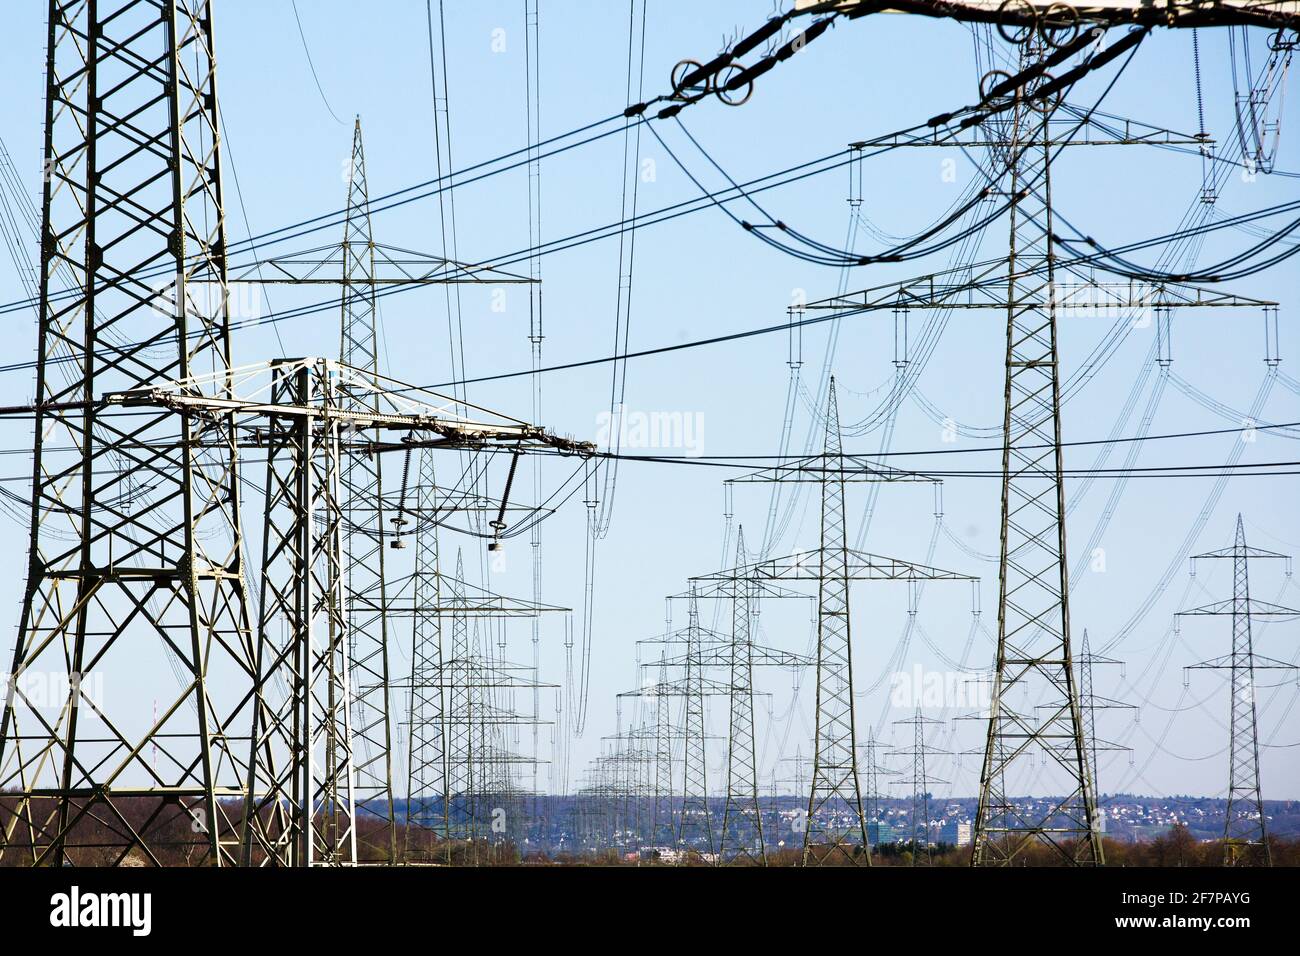 Power Line With Many High Voltage Pylons. Electricity Highway, Electricity Transport Stock Photo